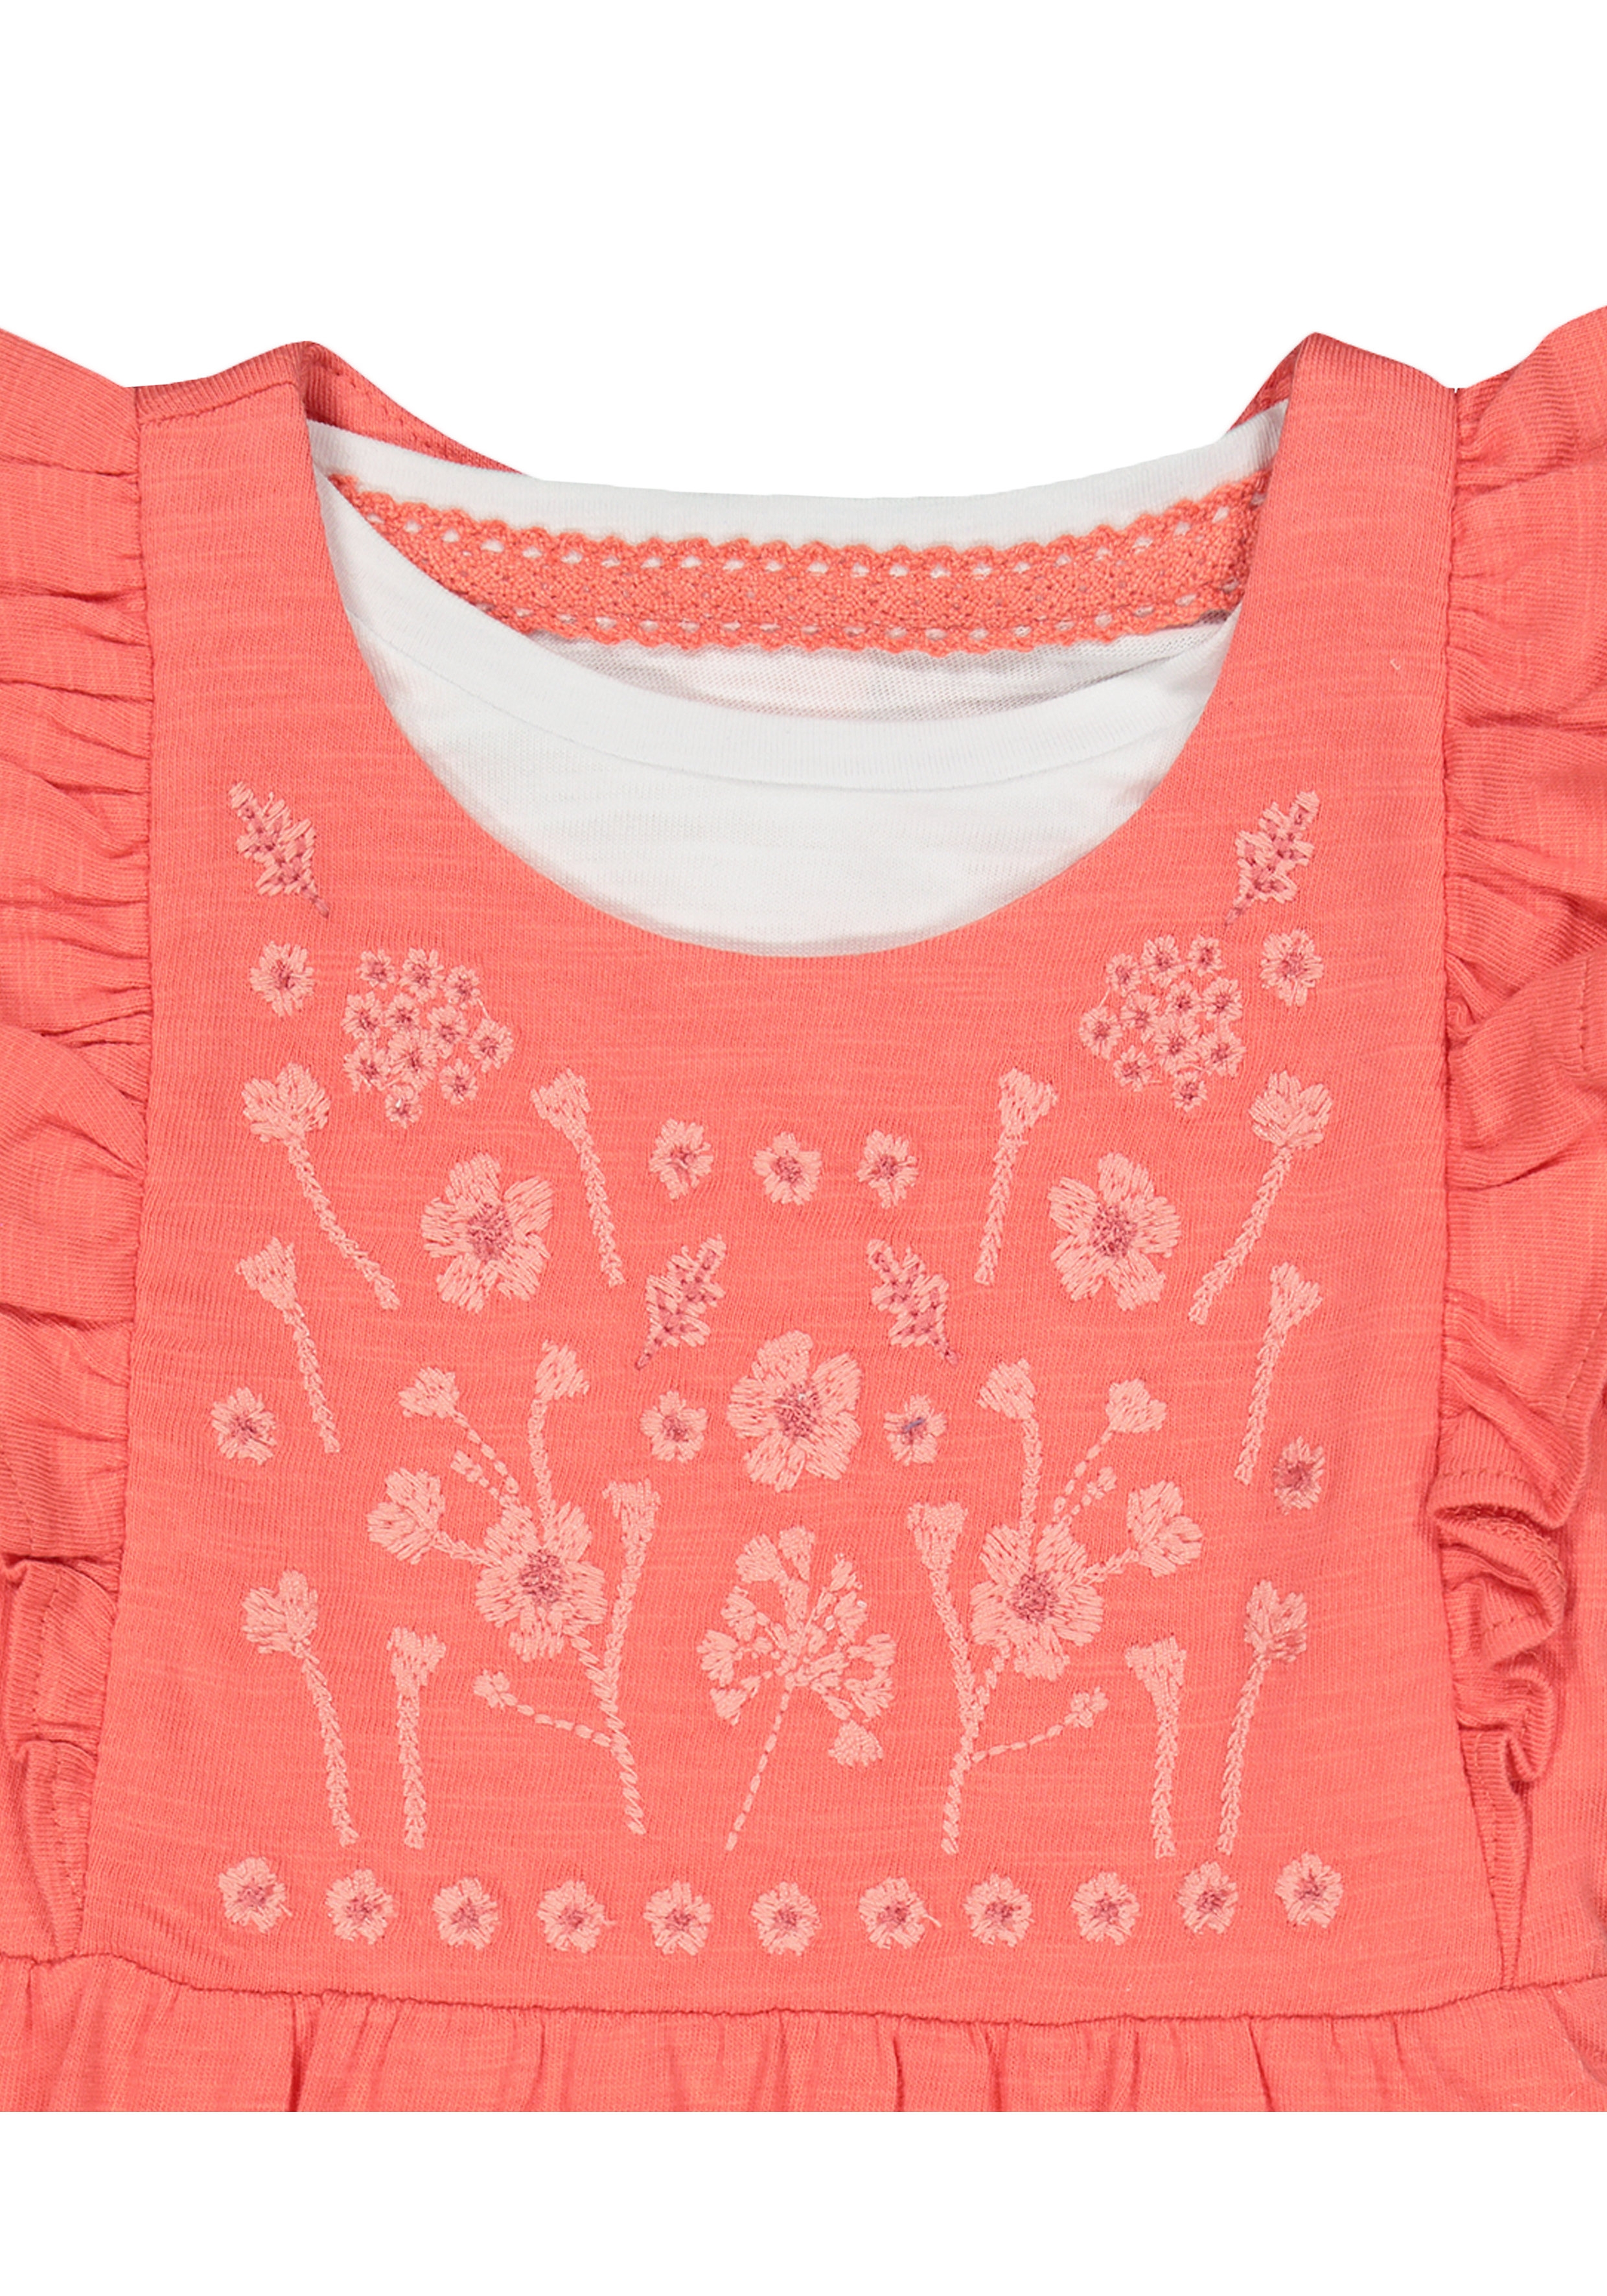 Mothercare | Girls Full Sleeves Dungaree Set Floral Embroidery - Coral 3